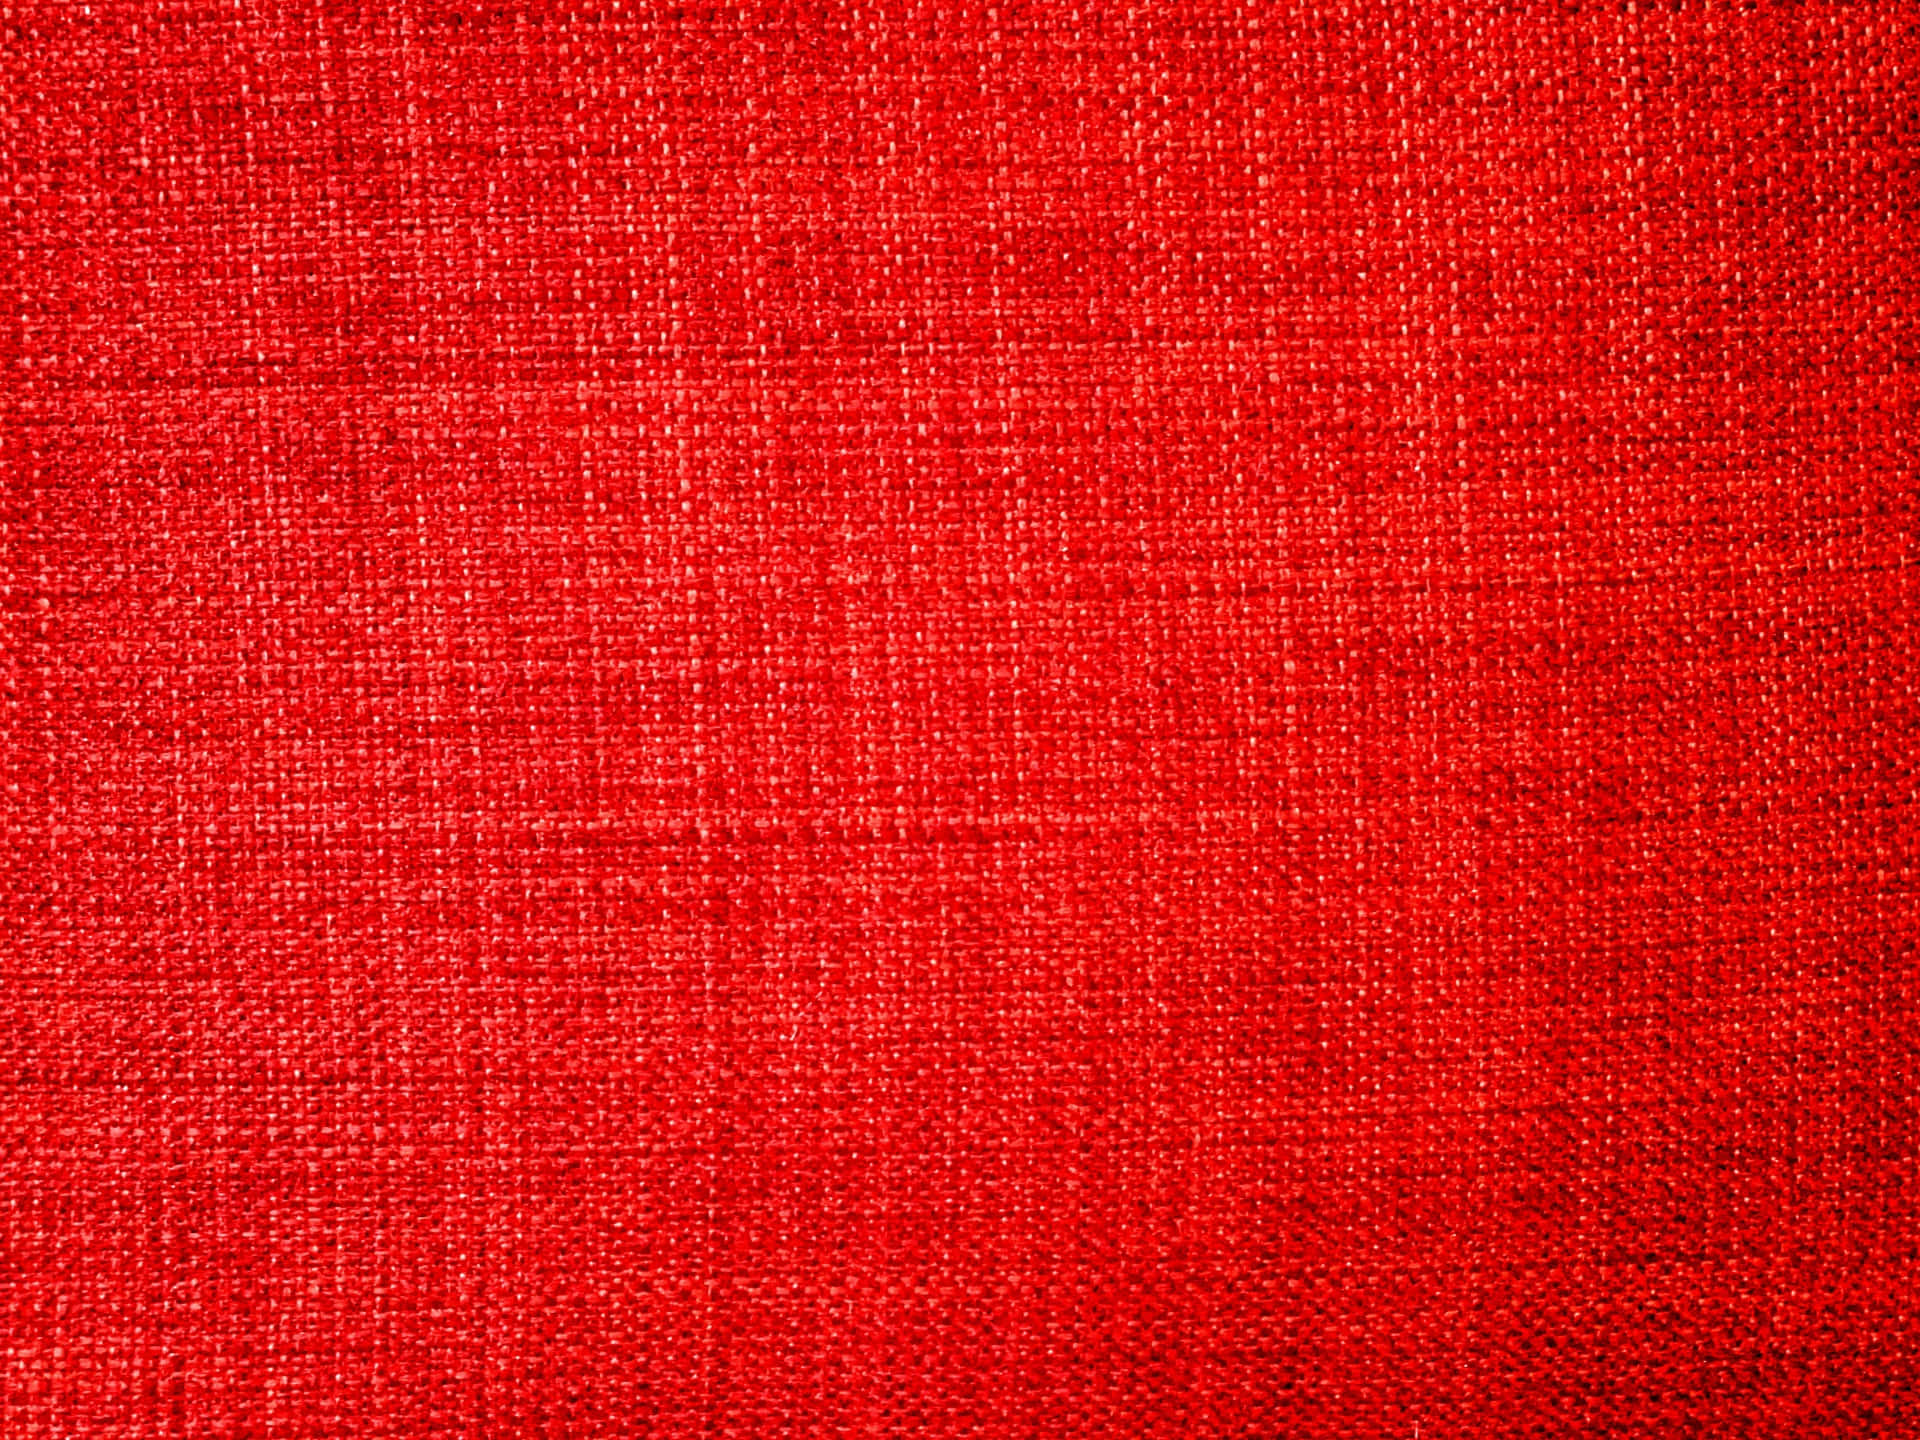 Fabric Texture Pictures Red Linen Cloth